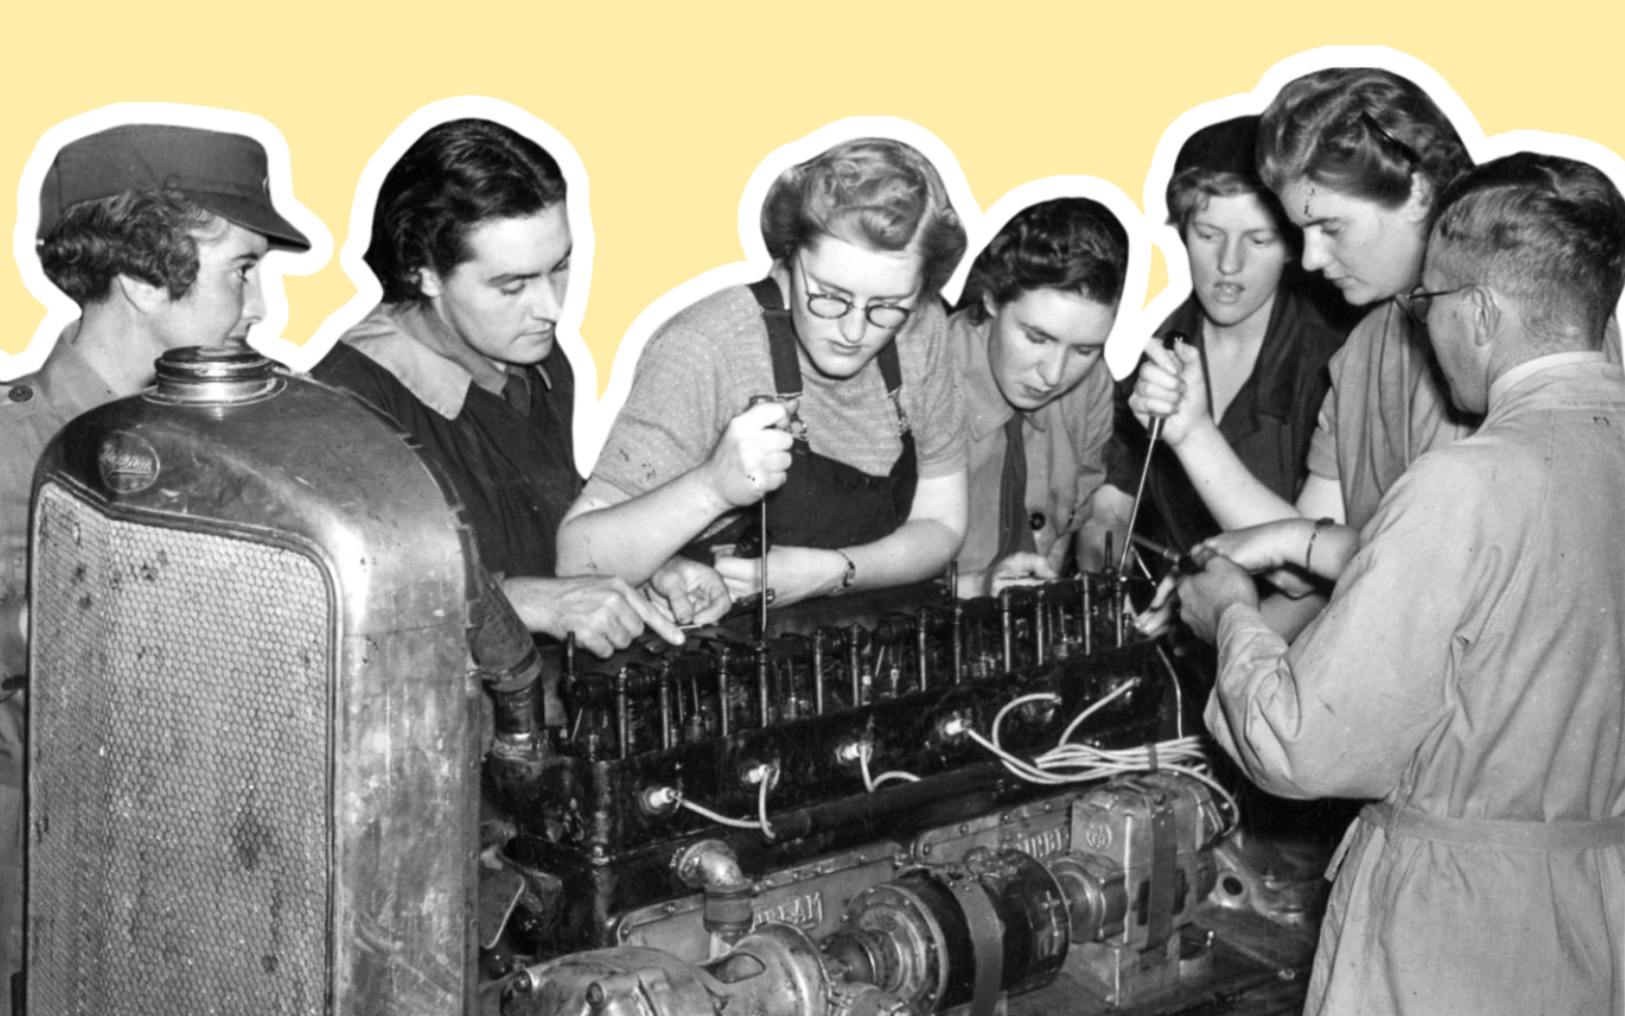 A historical black and white photograph featuring a group of women from the World War era working attentively on machinery. They are dressed in practical work attire, with one woman wearing a cap, which indicates a factory or industrial setting. The women are focused on their task, displaying engagement and teamwork as they operate the machinery together. The background is a muted yellow, and the women are highlighted with a white outline.